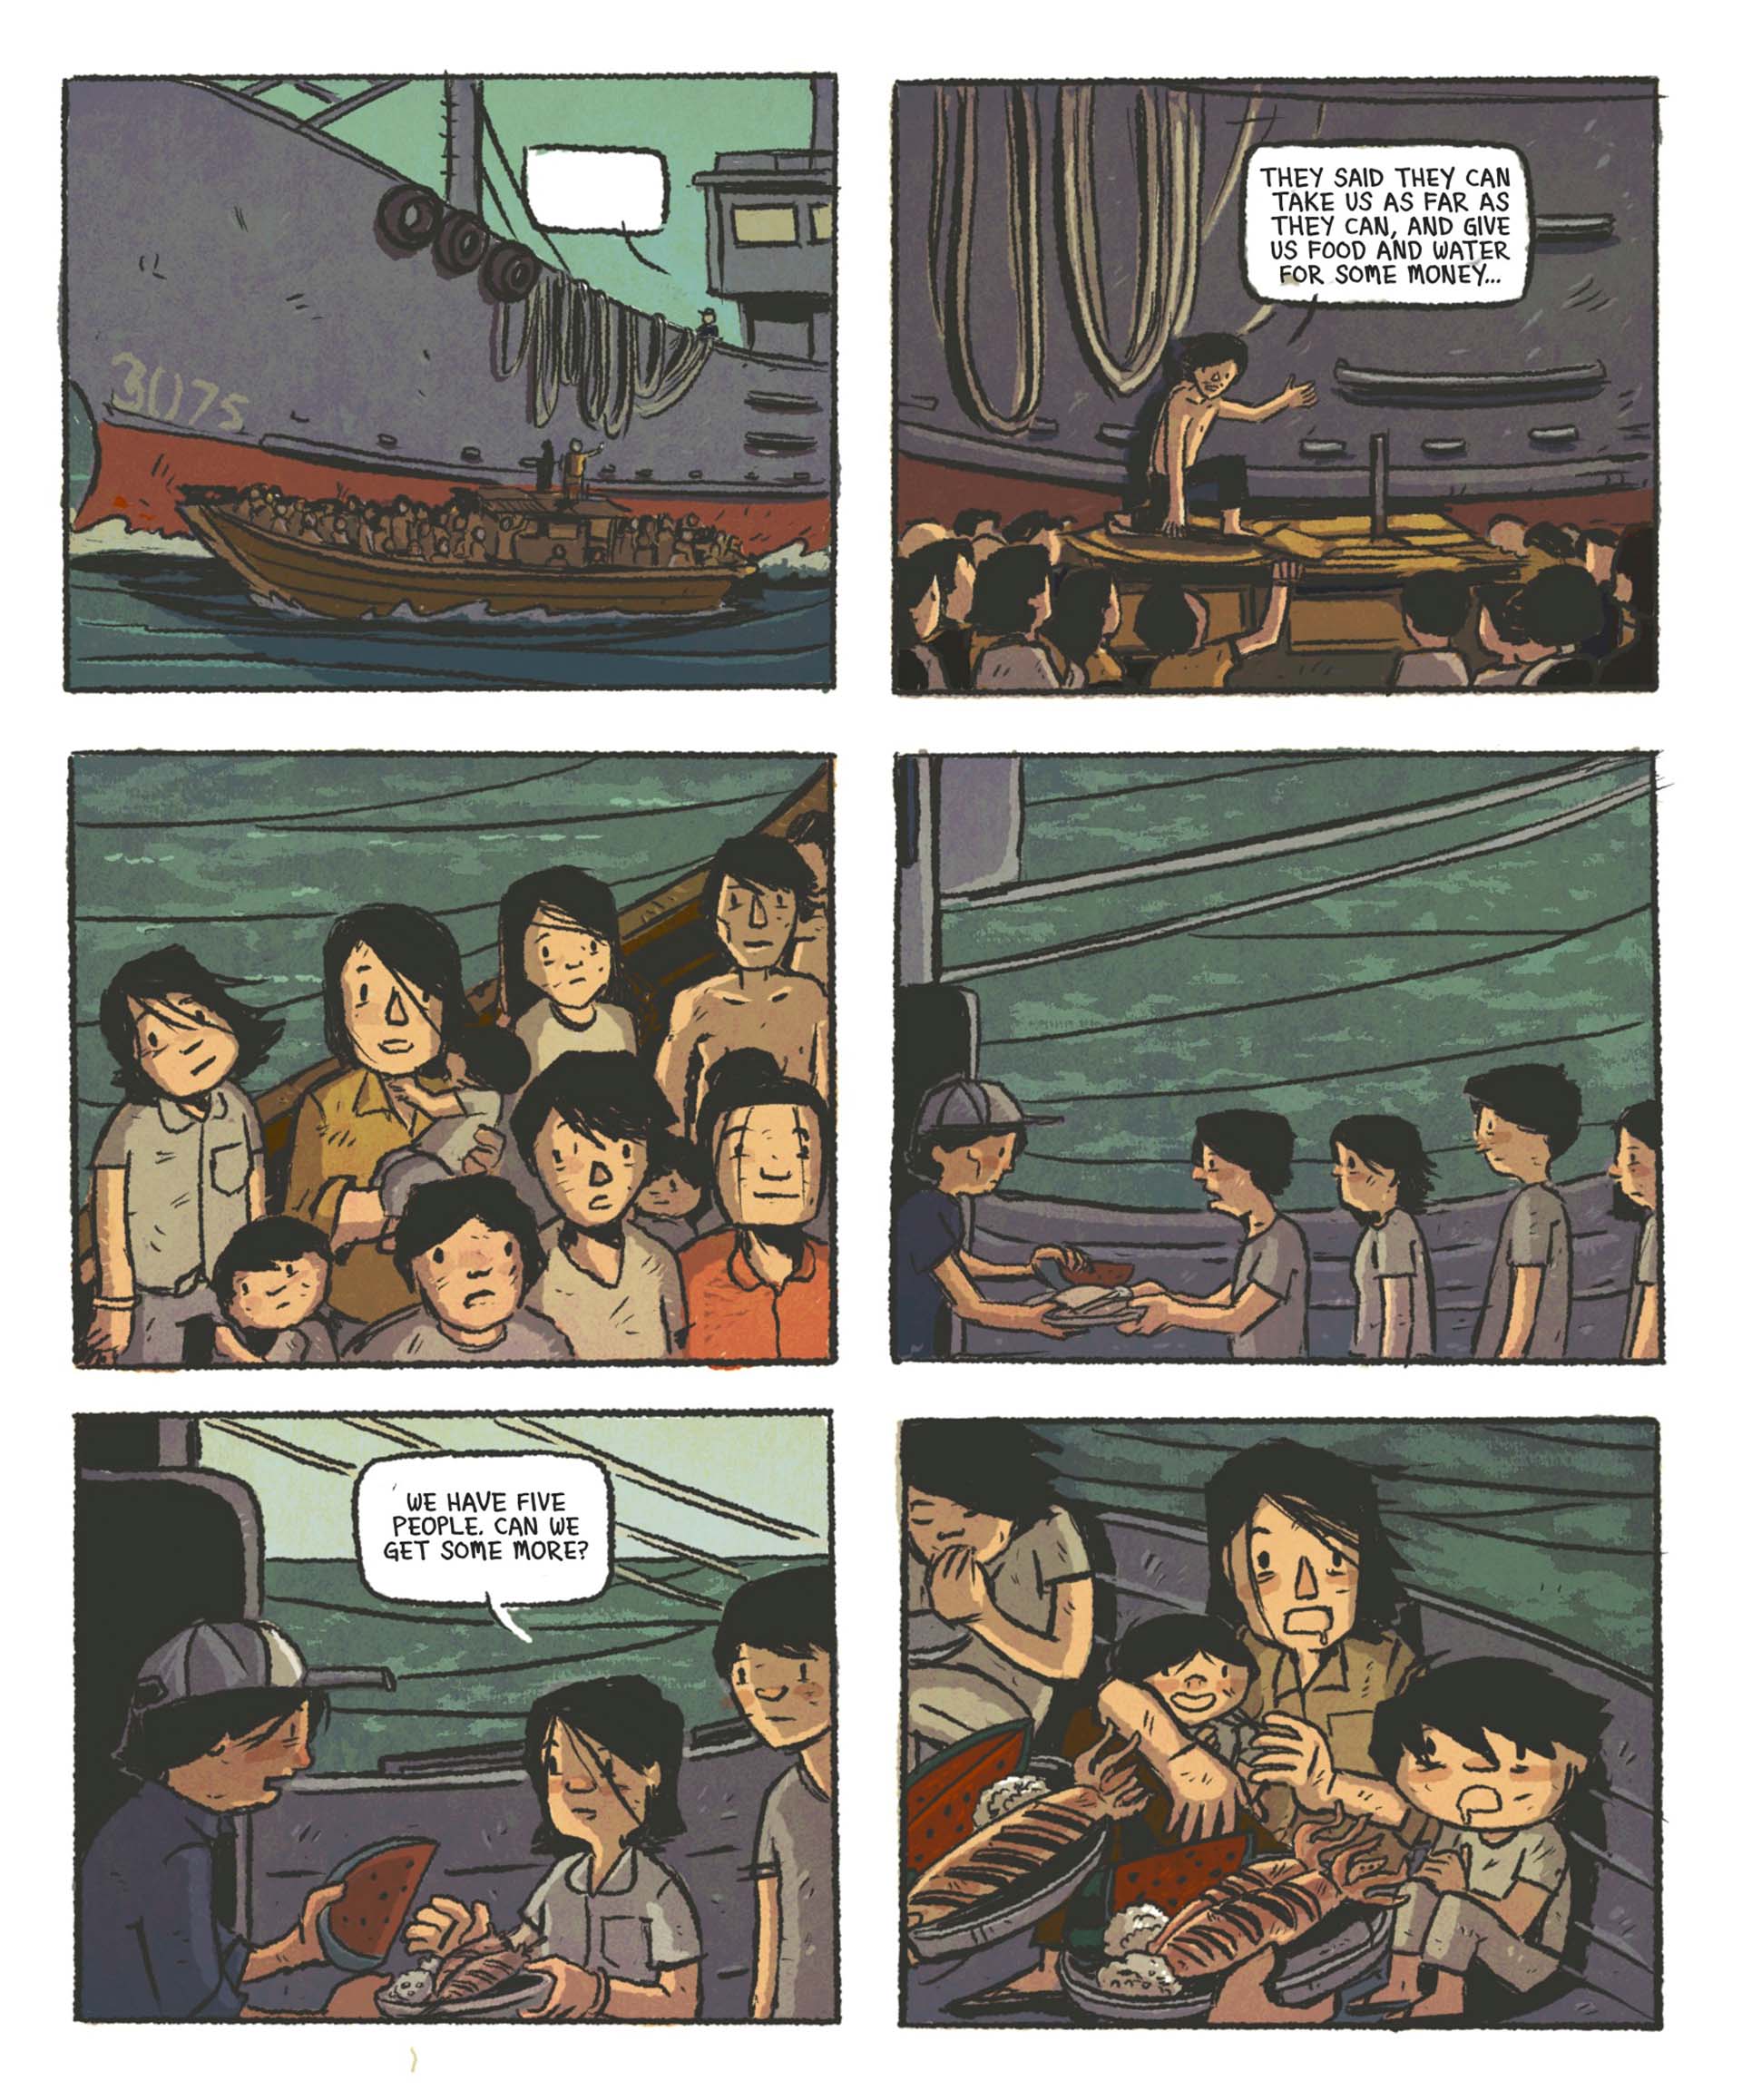 Panels excerpted from a graphic novel: 1) A boat pulls up to a larger freighter ship. 2) A man on the boat says, "They said they can take us as far as they can, and give us food and water for some money..." 3) The Vietnamese refugees on the boat look stunned to receive this news. 4) They line up to receive food from a man in a baseball cap. 5) When she reaches the front of the line, one woman says, "We have five people. Can we get some more?" as he hands her a plate of squid and a slice of watermelon. 6) The woman and her two small children look overwhelmed as someone approaches offering two additional plates of squid and rice.